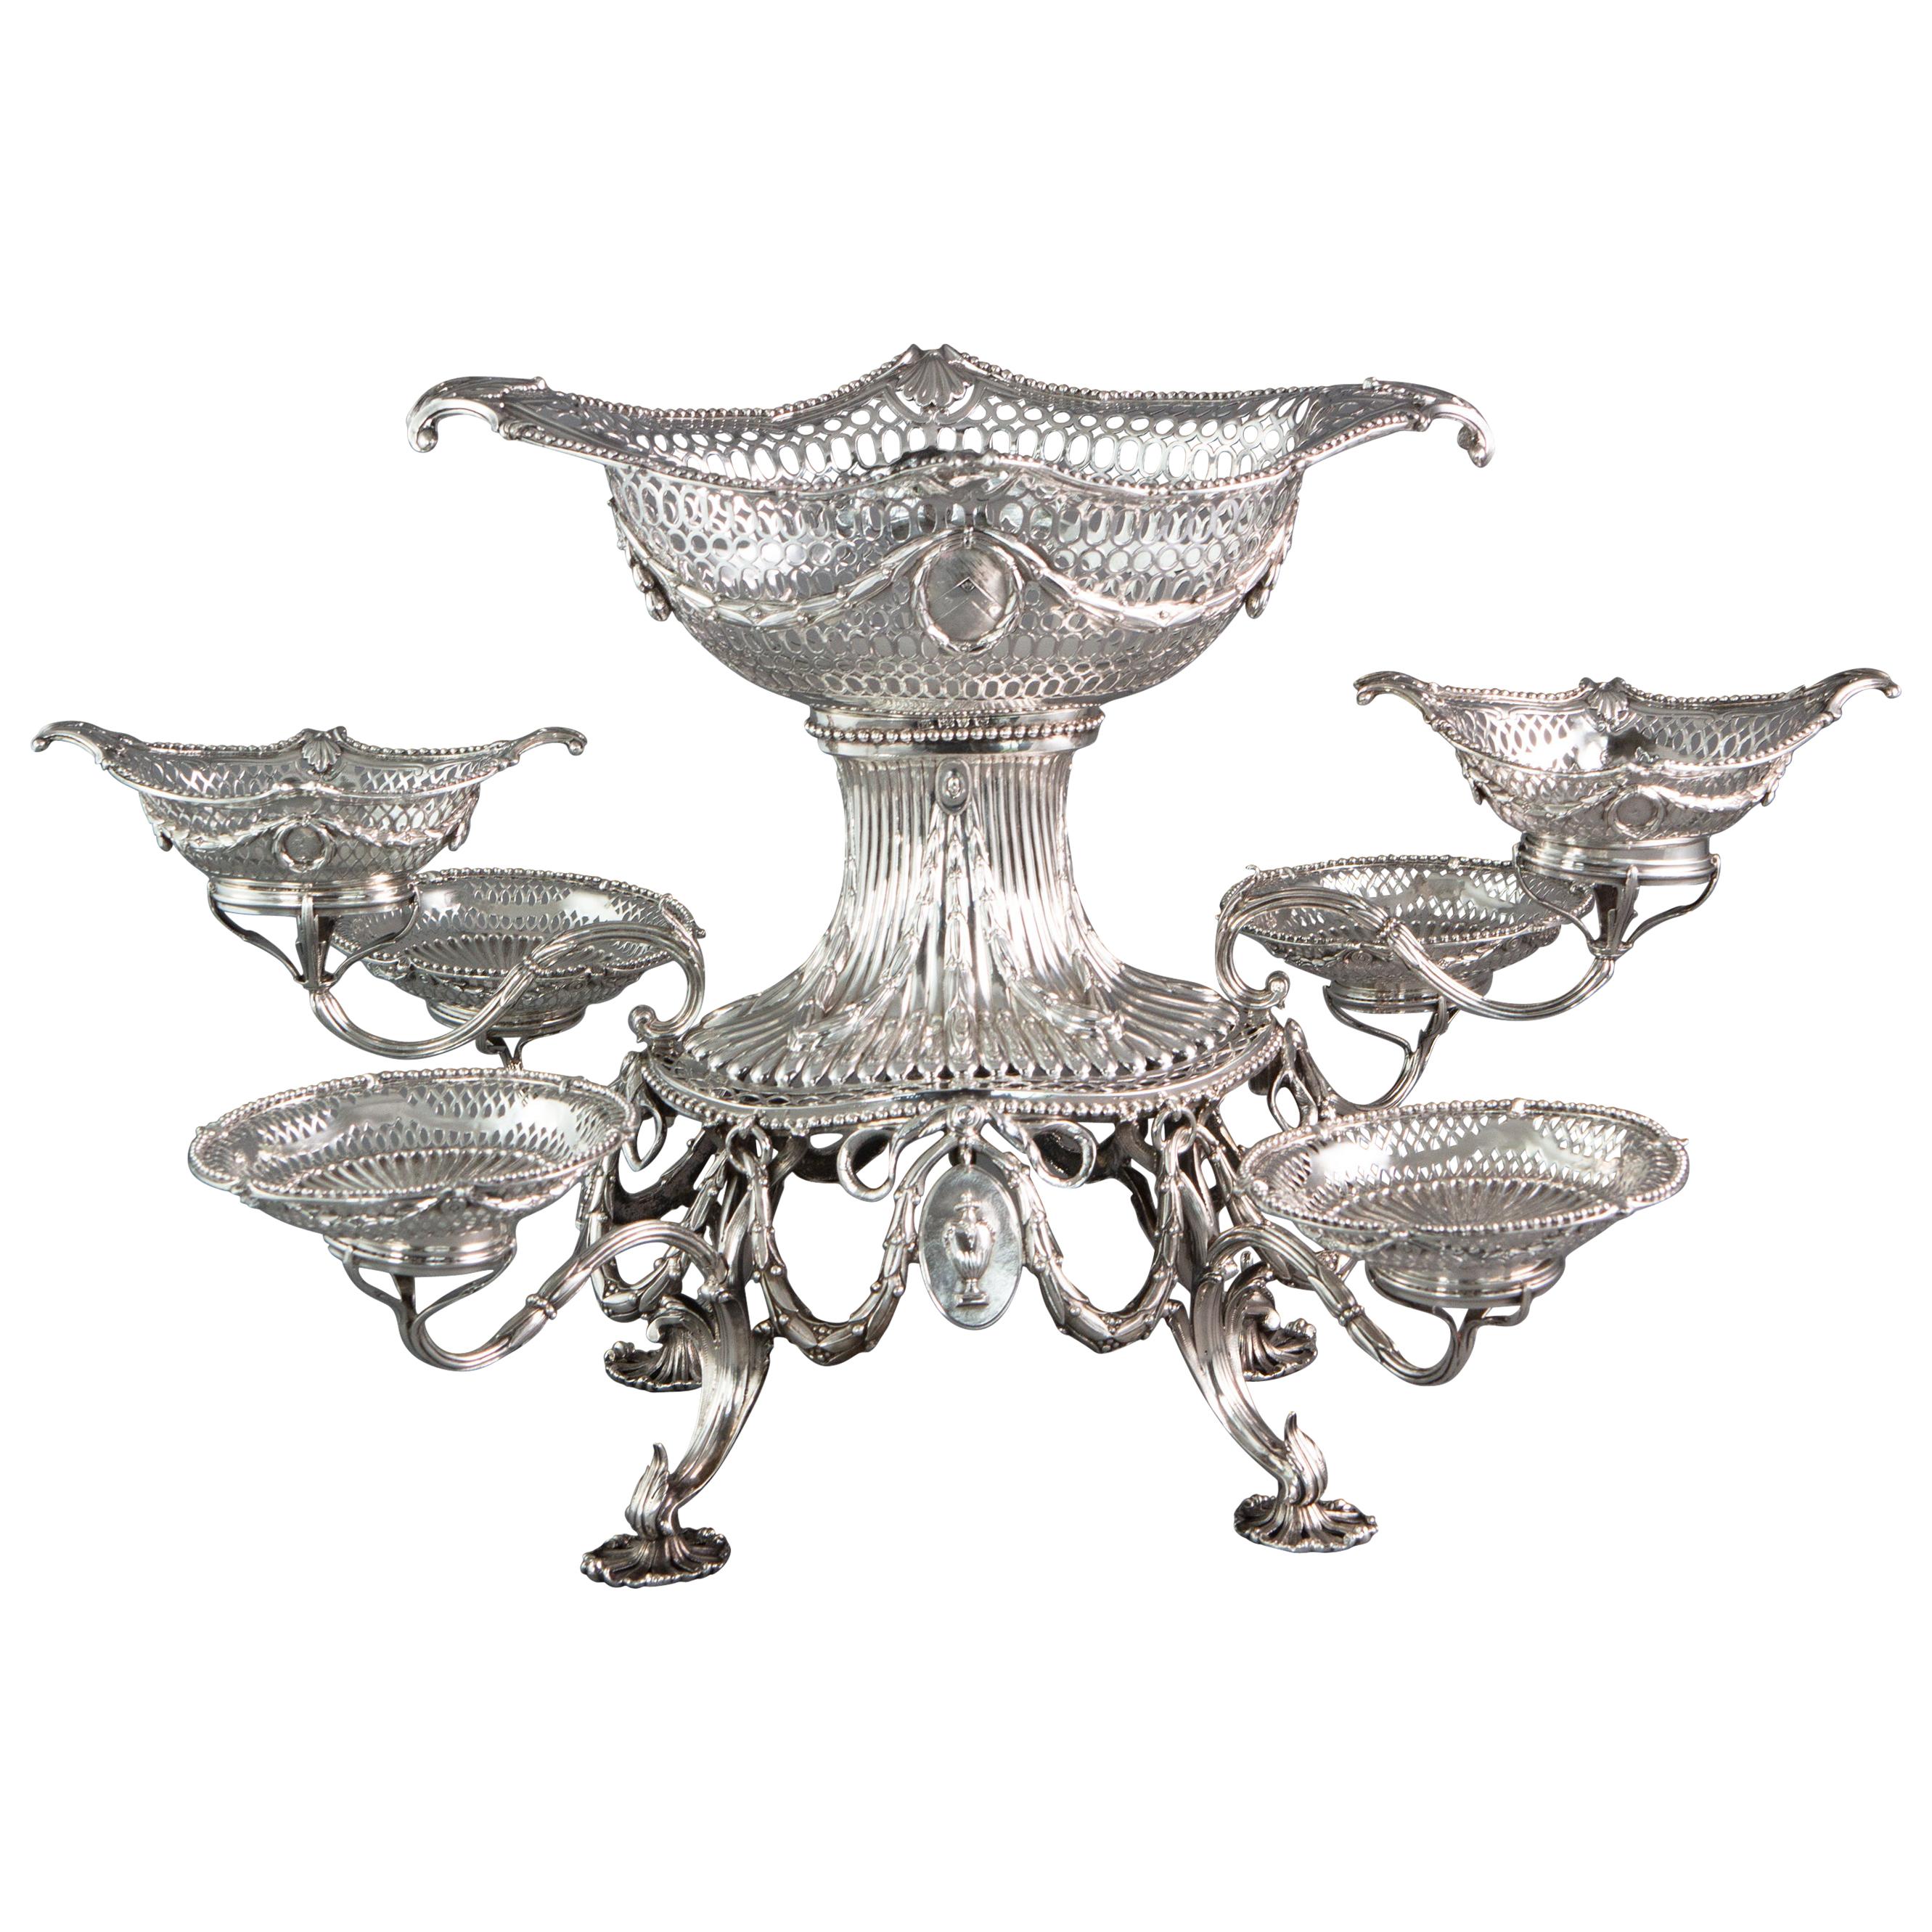 Silver Epergne or Table Centrepiece, Thomas Pitts, London 1773